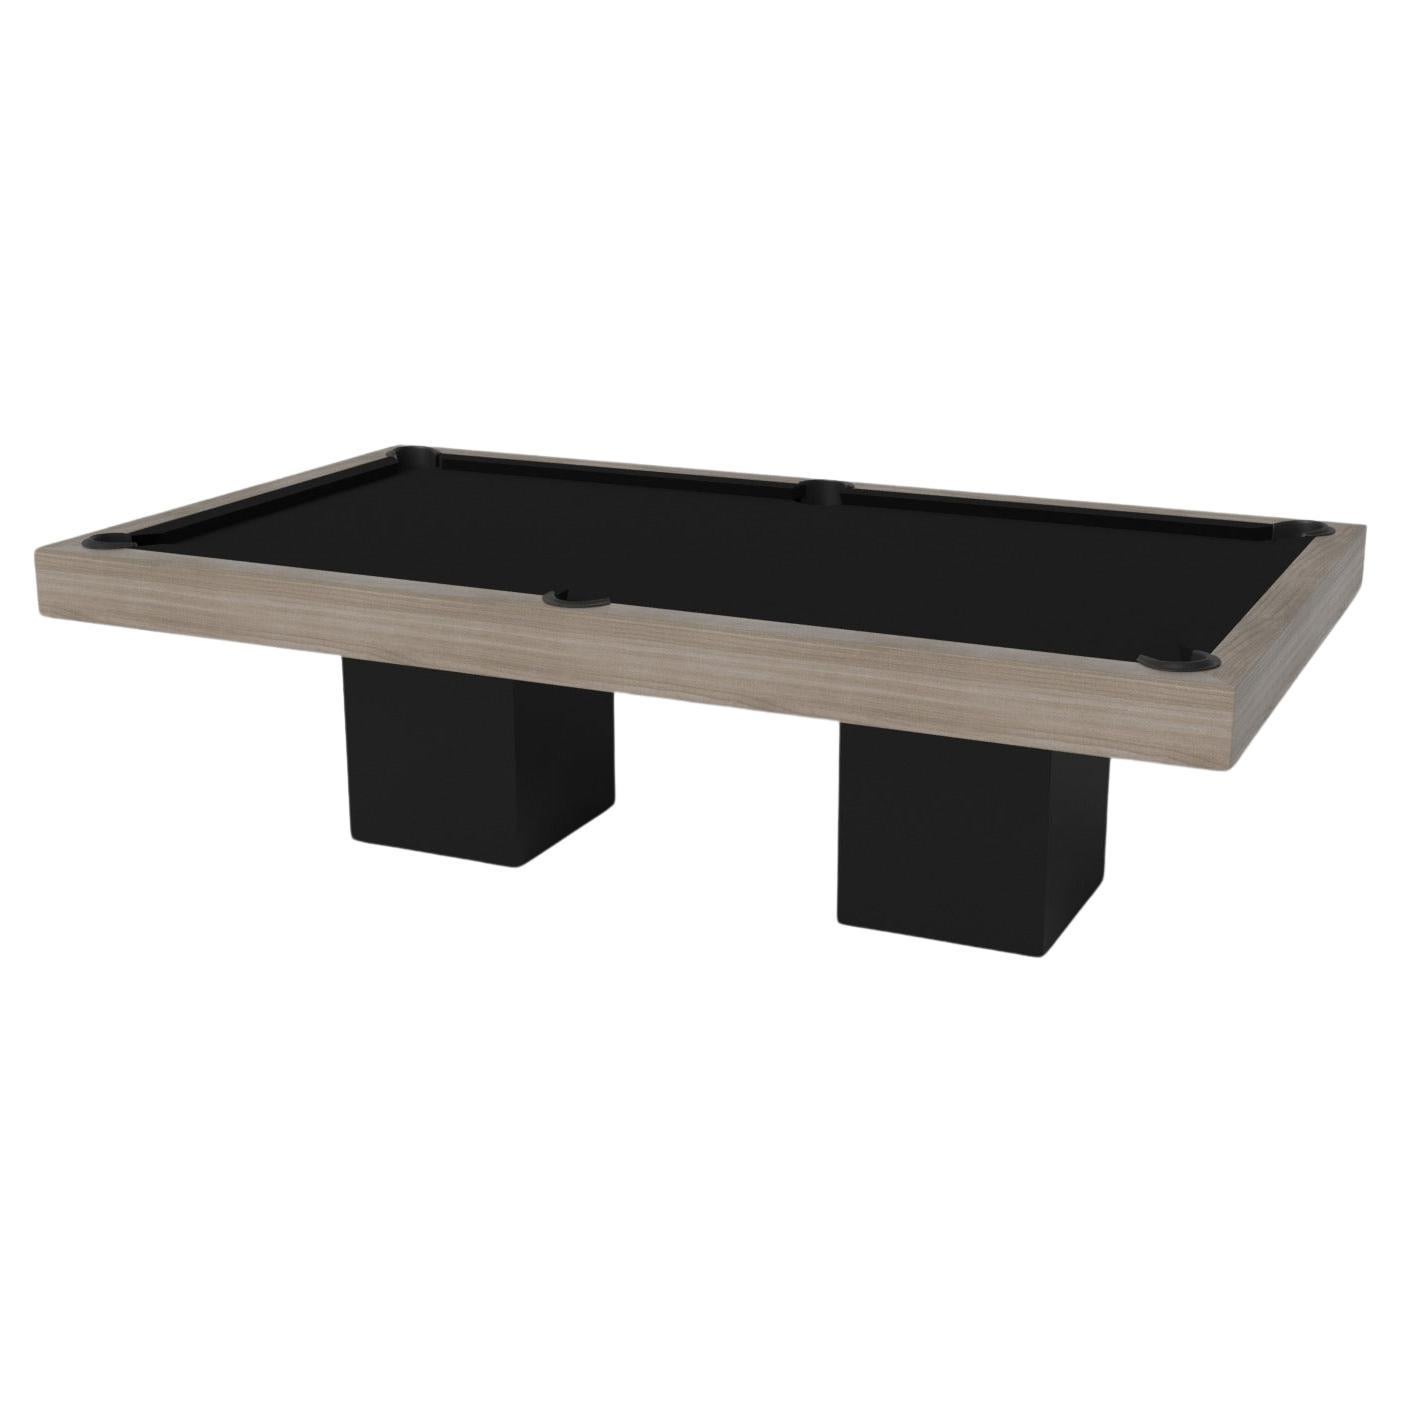 Elevate Customs Trestle Pool Table / Solid White Oak Wood in 9' - Made in USA